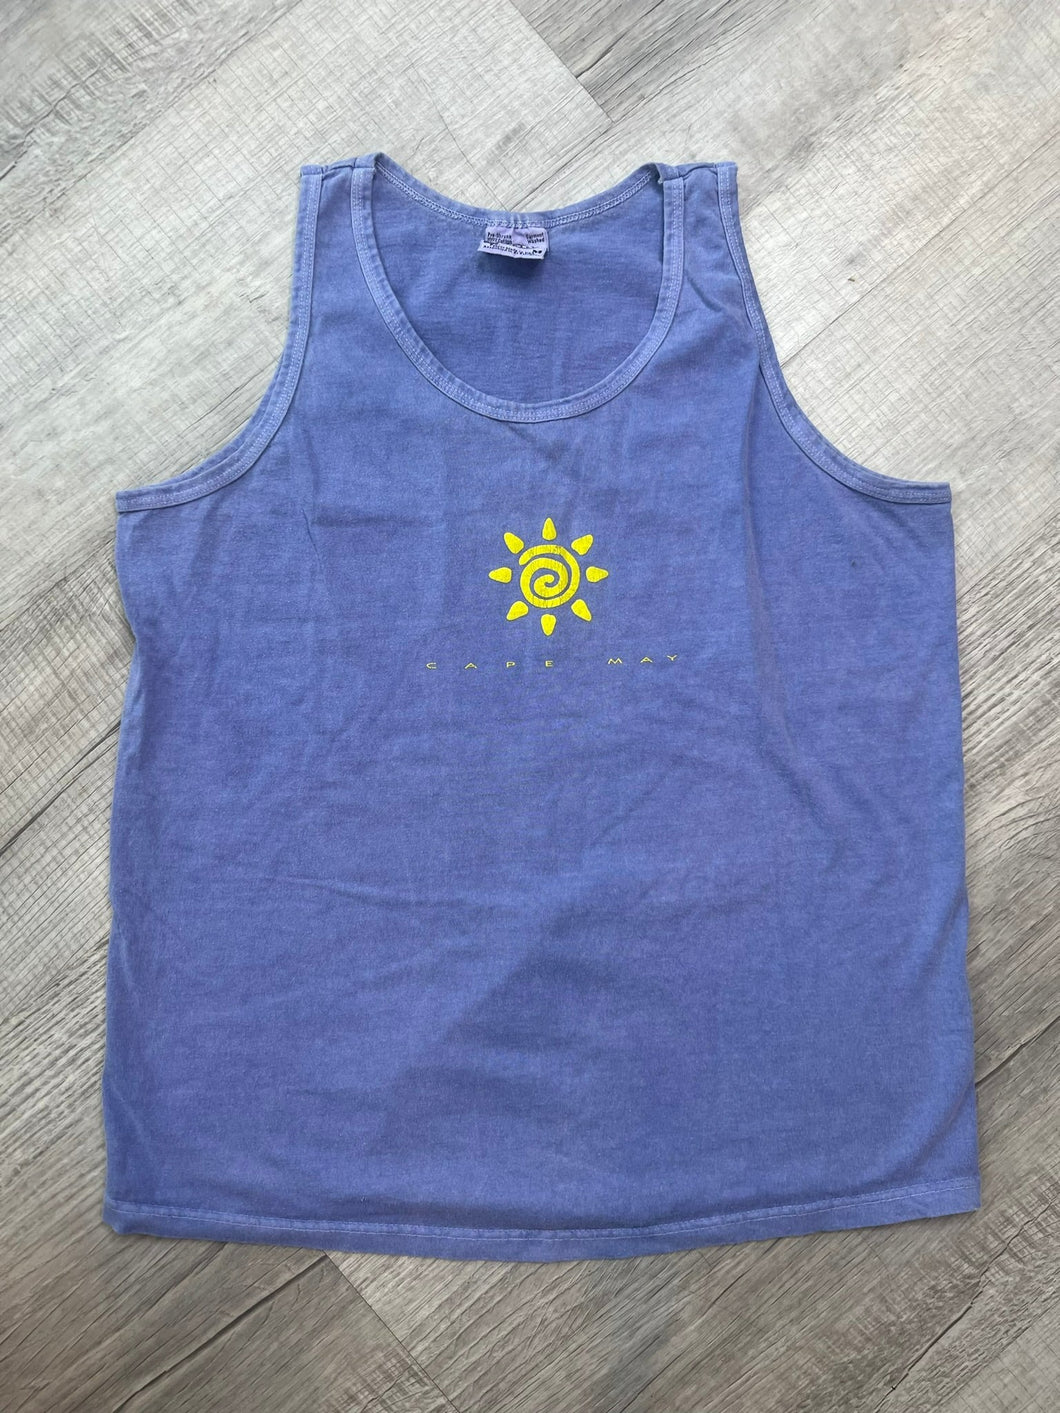 Vintage Cape May Tank Top